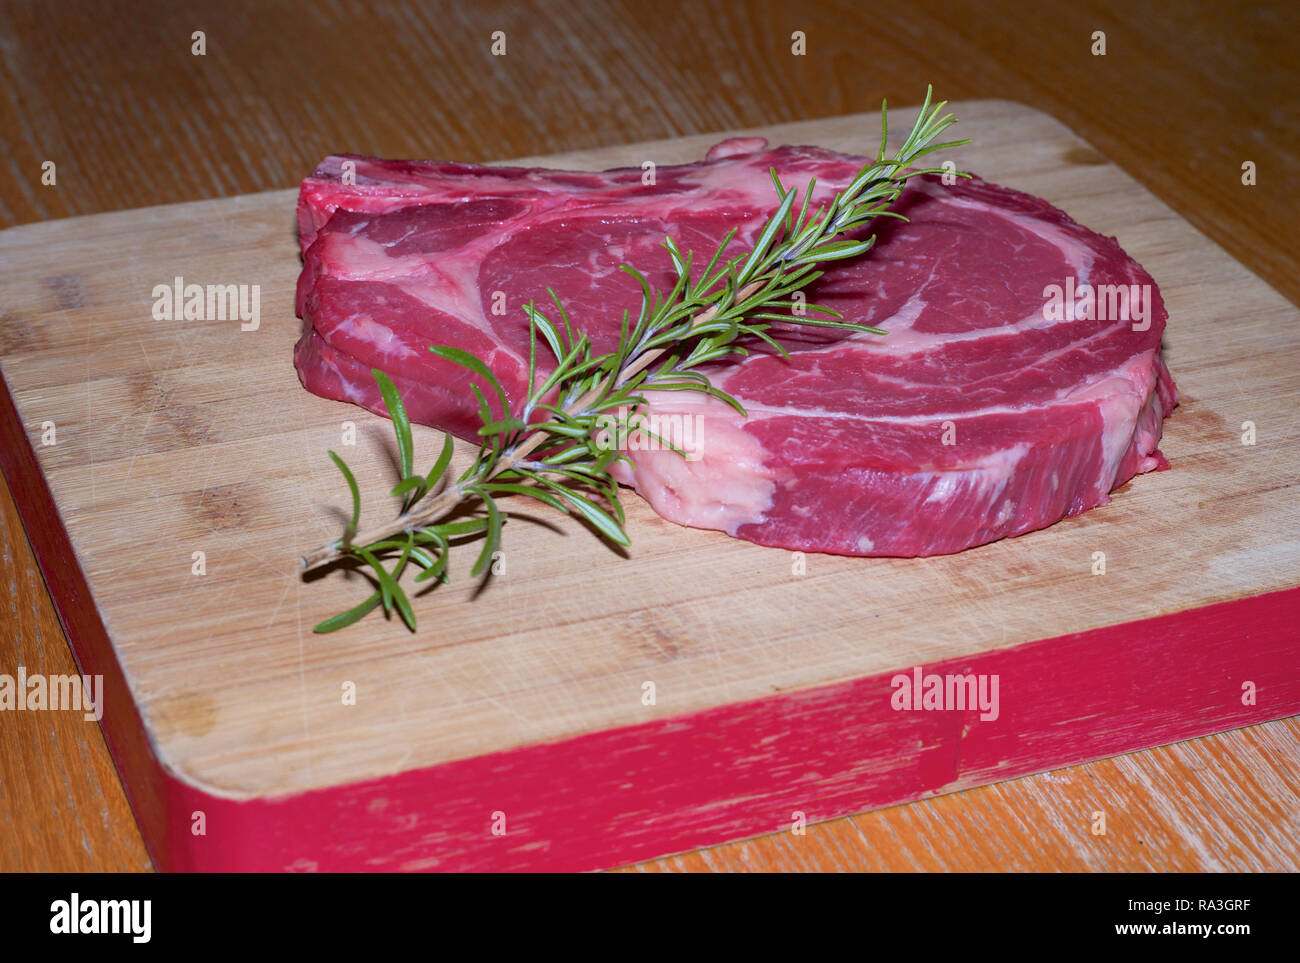 Raw Prime Rib of Beef on a Wooden Board Stock Photo